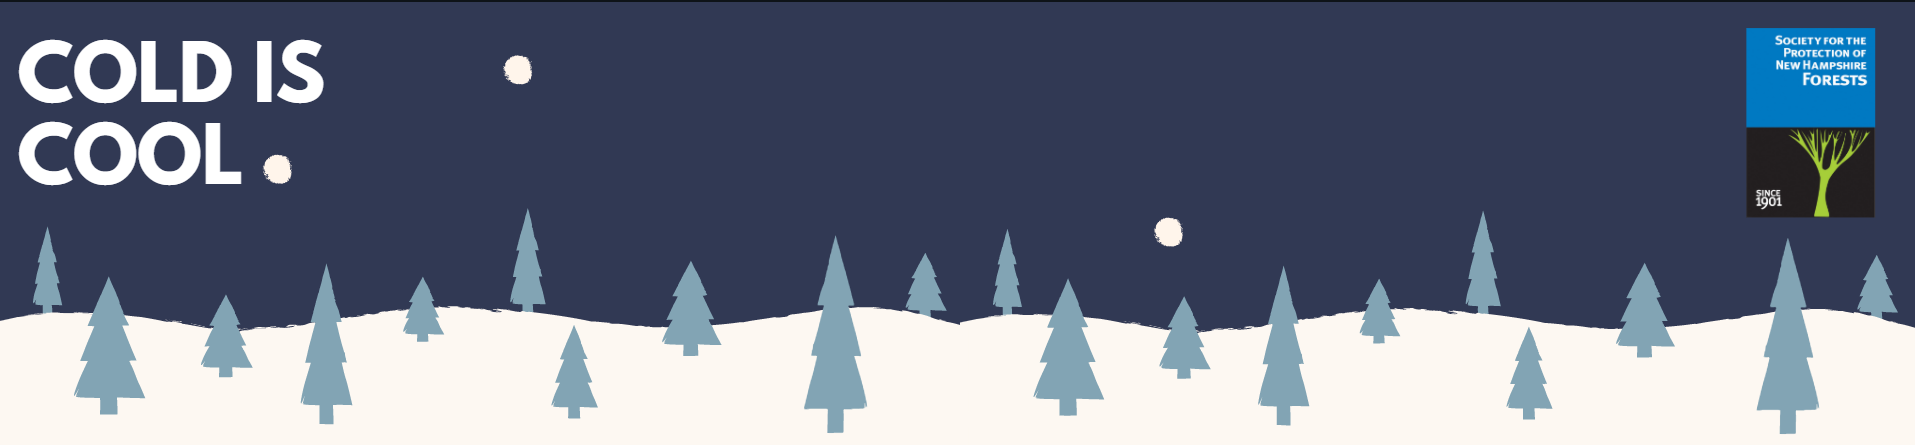 A graphic of a night sky over snow-covered trees that says Cold is Cool.